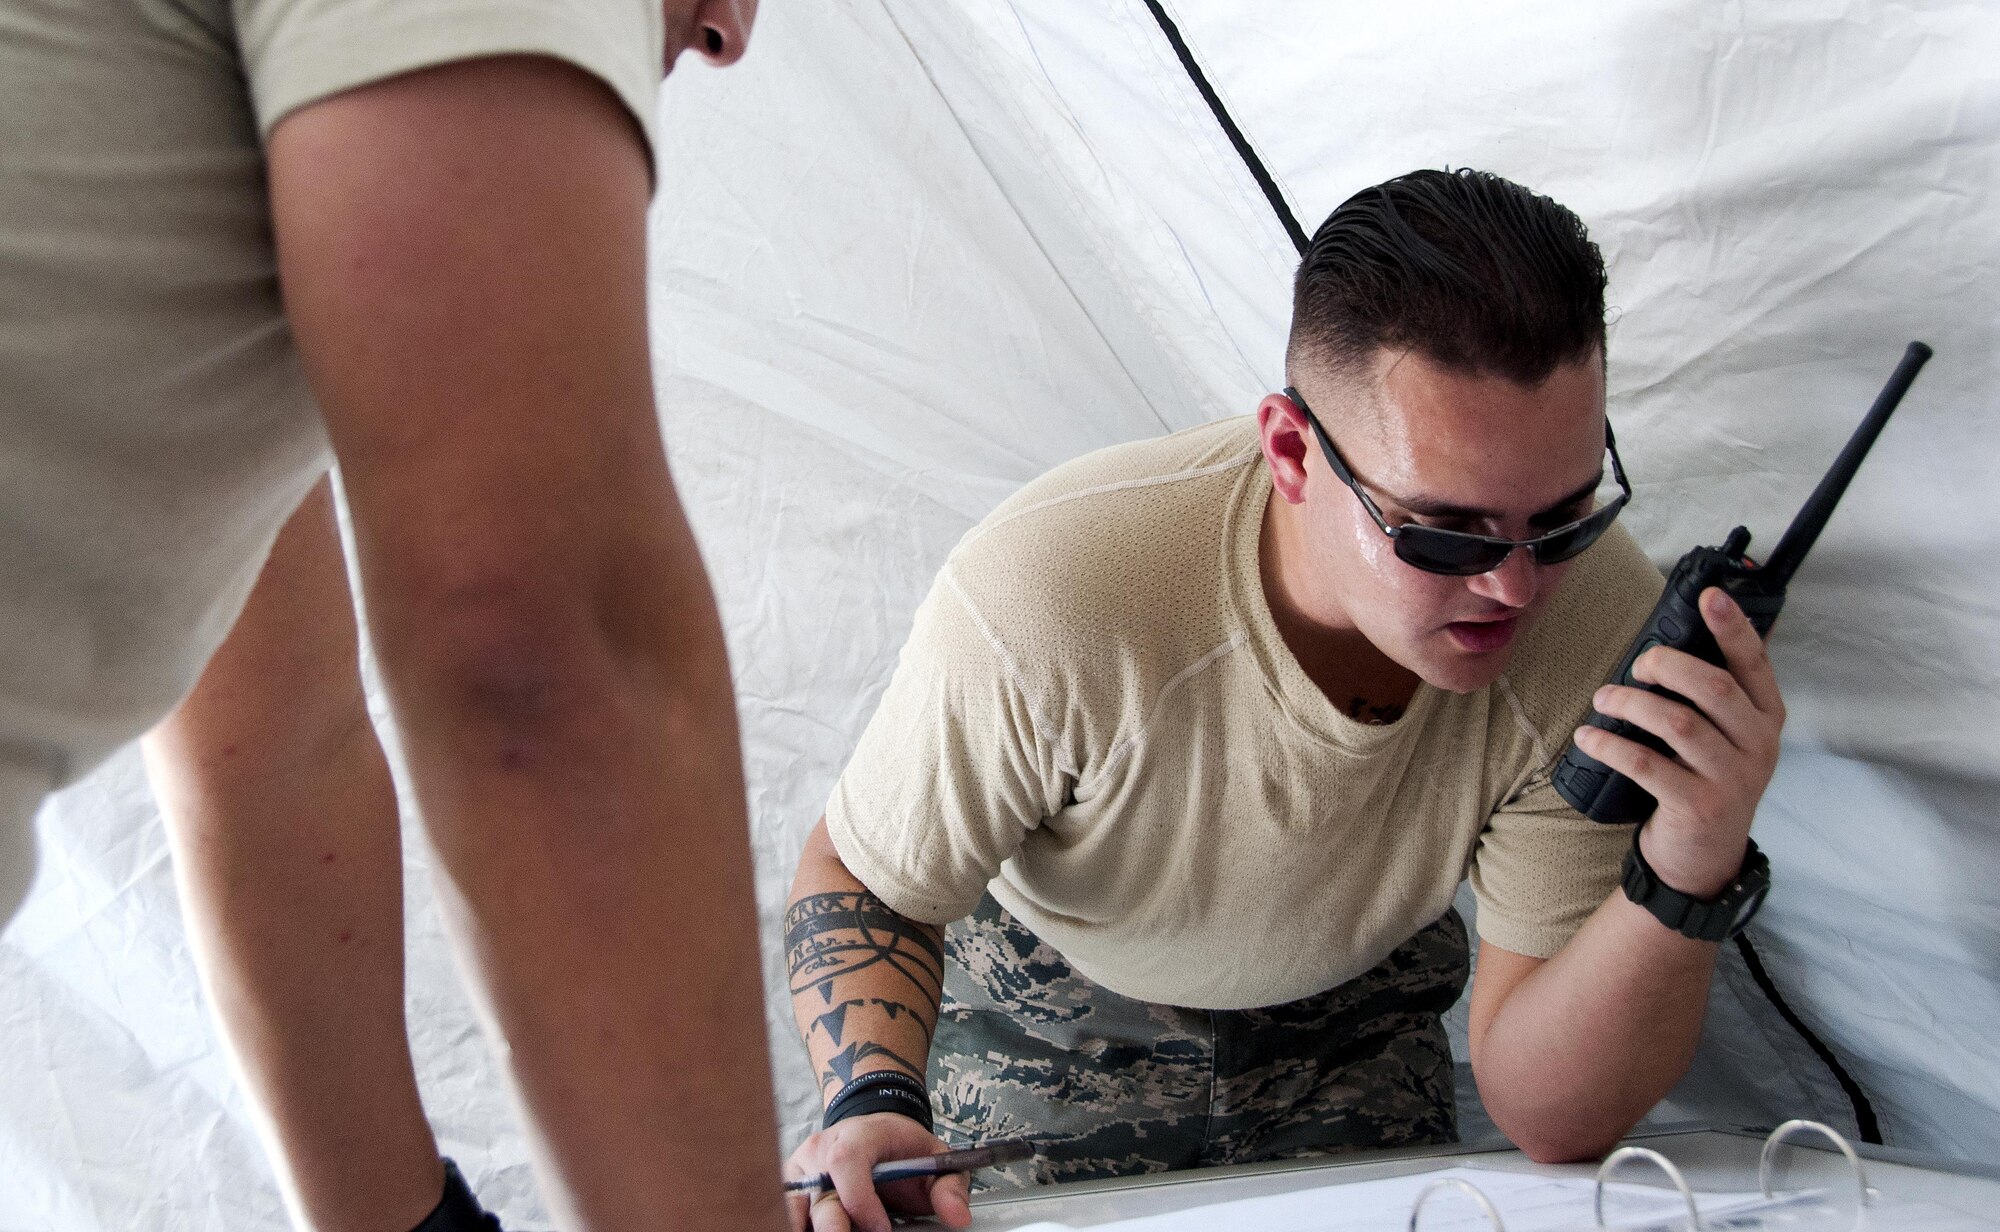 Master Sgt. Joseph Mizer, 349th Aeromedical Staging Squadron logistics technician, sets up radio communications as part of a unit evaluation inspection for Patriot Wyvern at Travis Air Force Base, Cali., on July 22, 2017. The 349th ASTS members had one hour to set up the En-Route Patient Staging Facility and  communications. They accomplished their task in less than 30 minutes. (U.S. Air Force photo by Staff Sgt. Daniel Phelps)